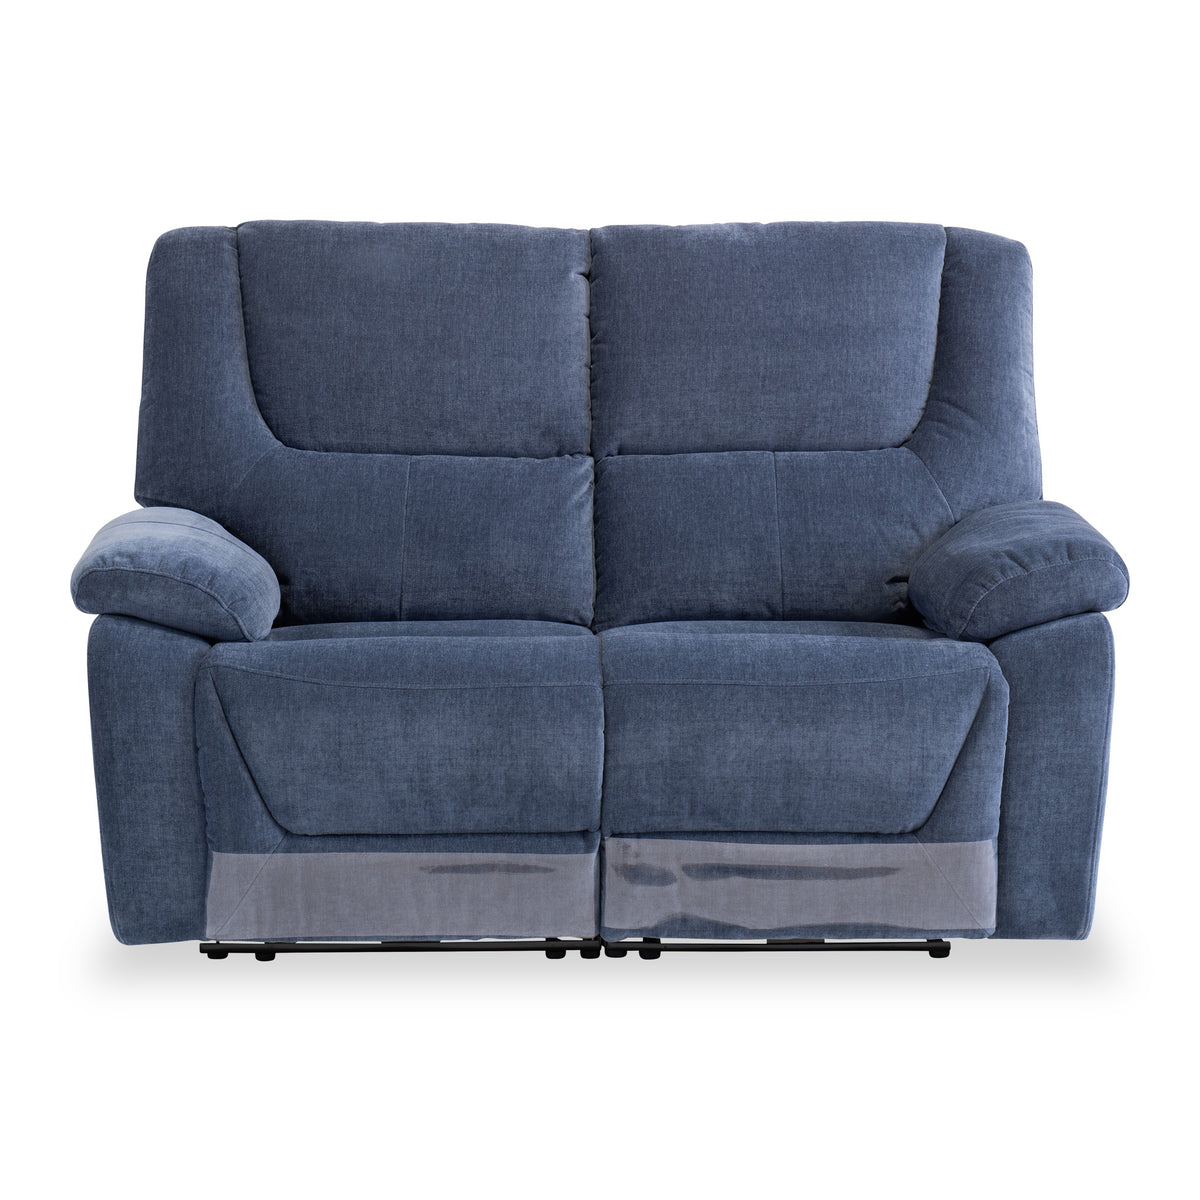 Barlow Blue Fabric Electric Reclining 2 Seater Sofa from Roseland Furniture